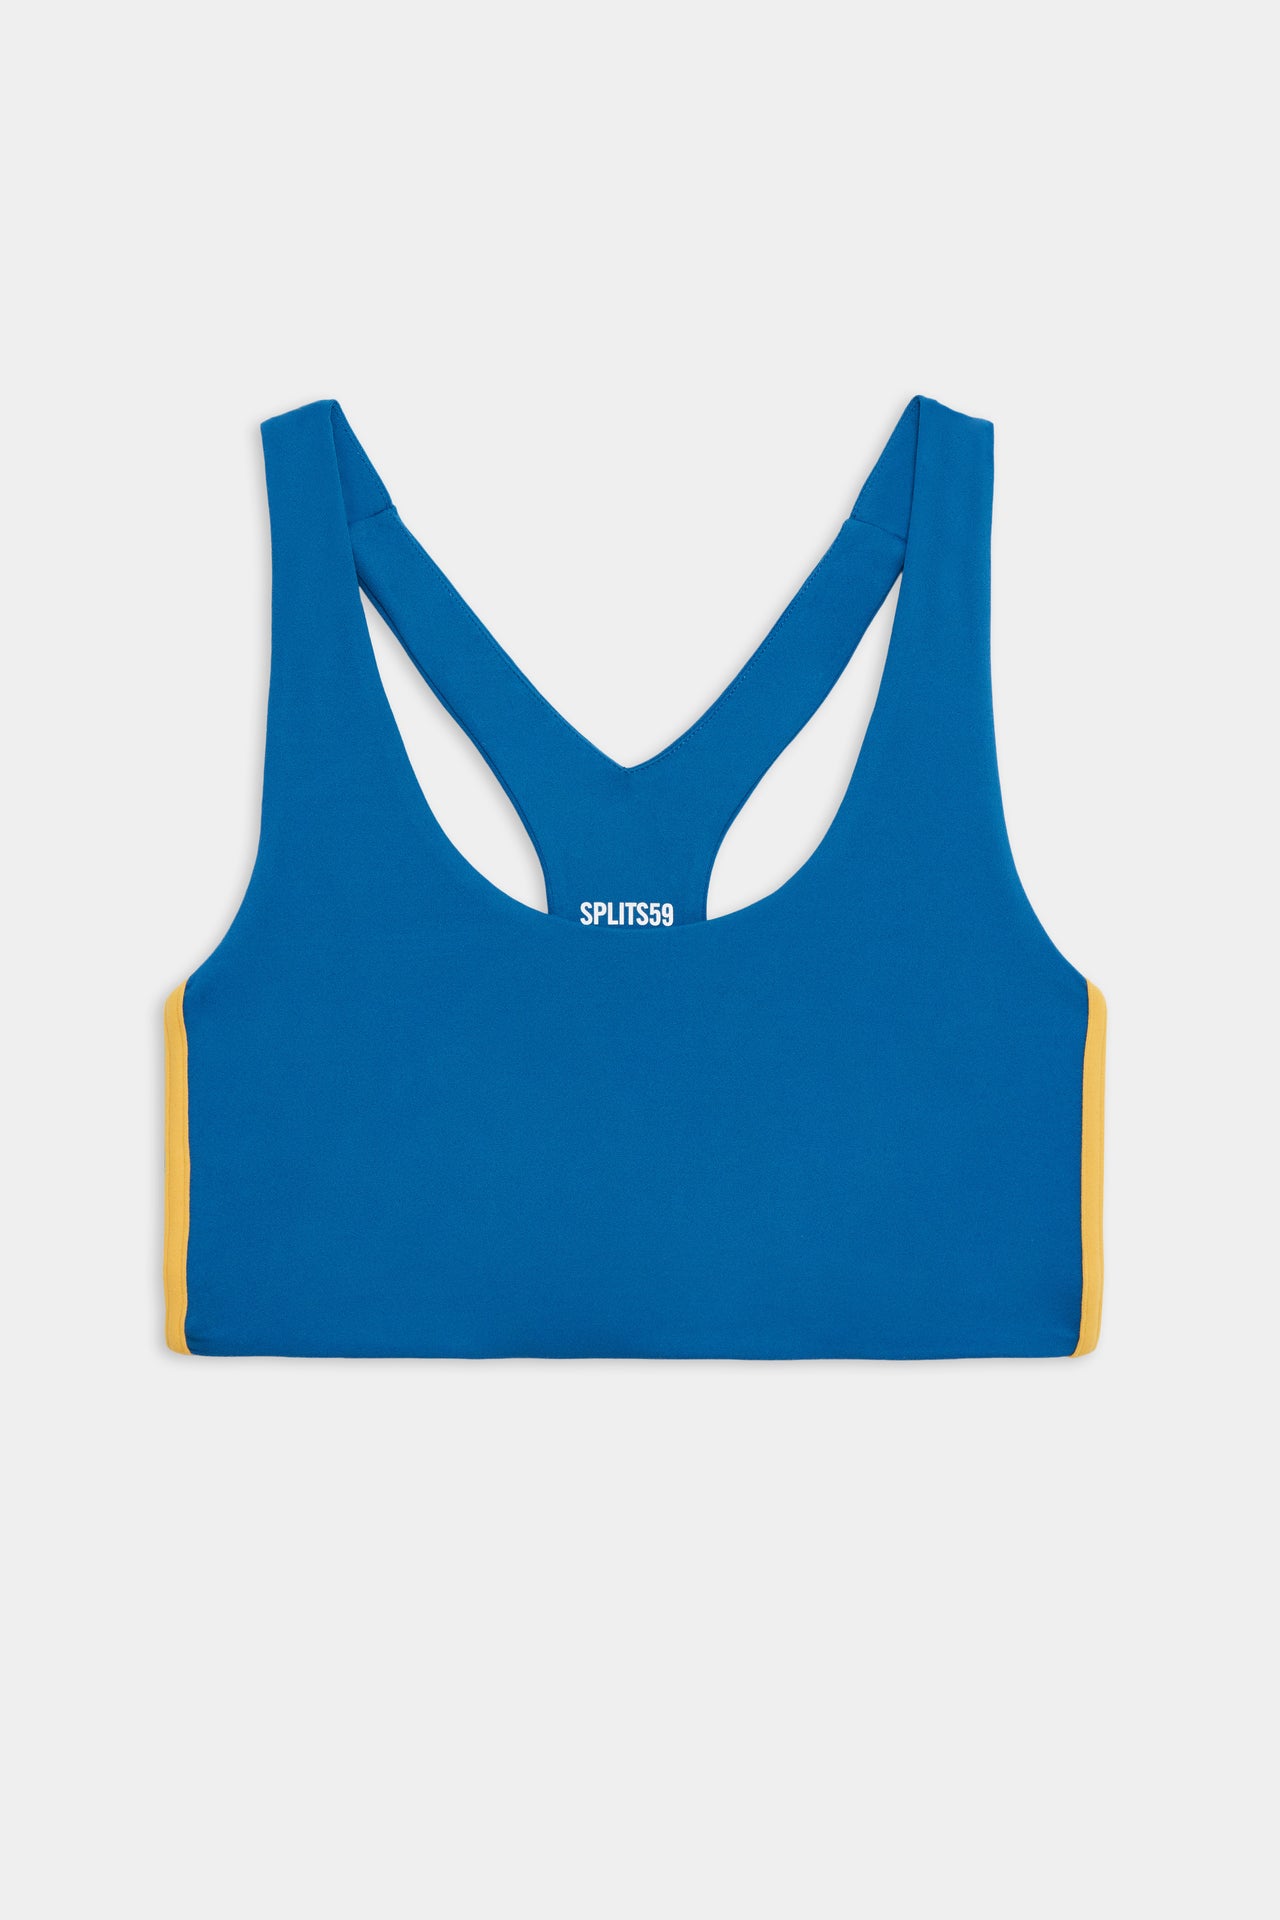 Flat view of blue sports bra with two yellow stripes down the side